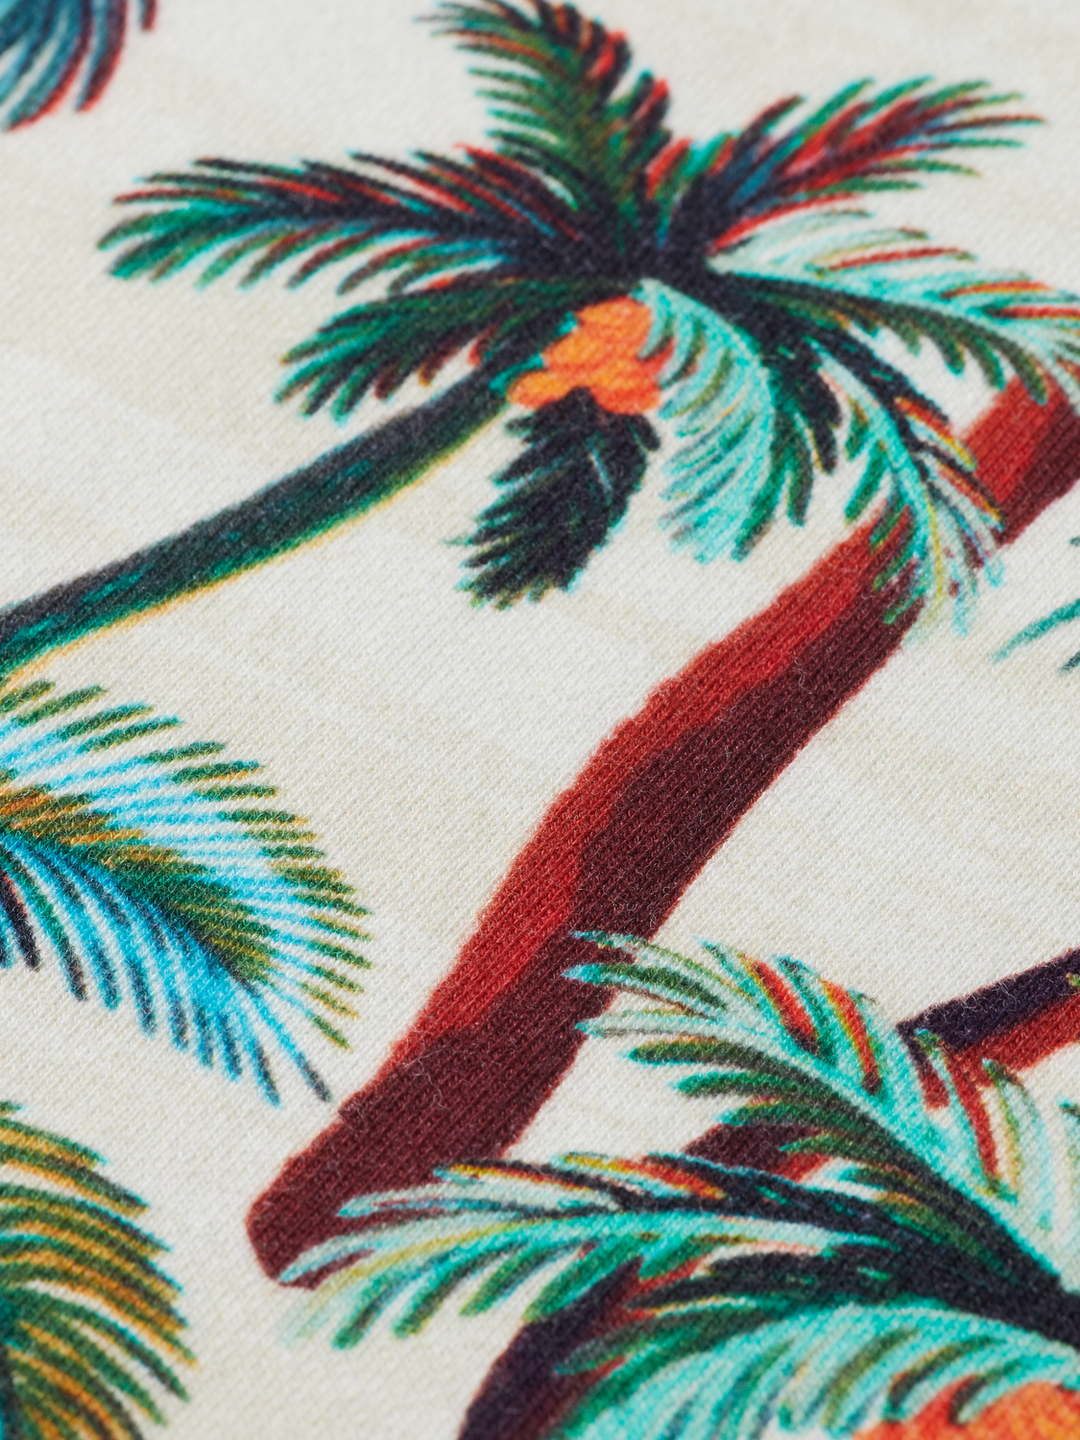 Printed Sweatshirt with Allover Palm Tree Print | Buster McGee